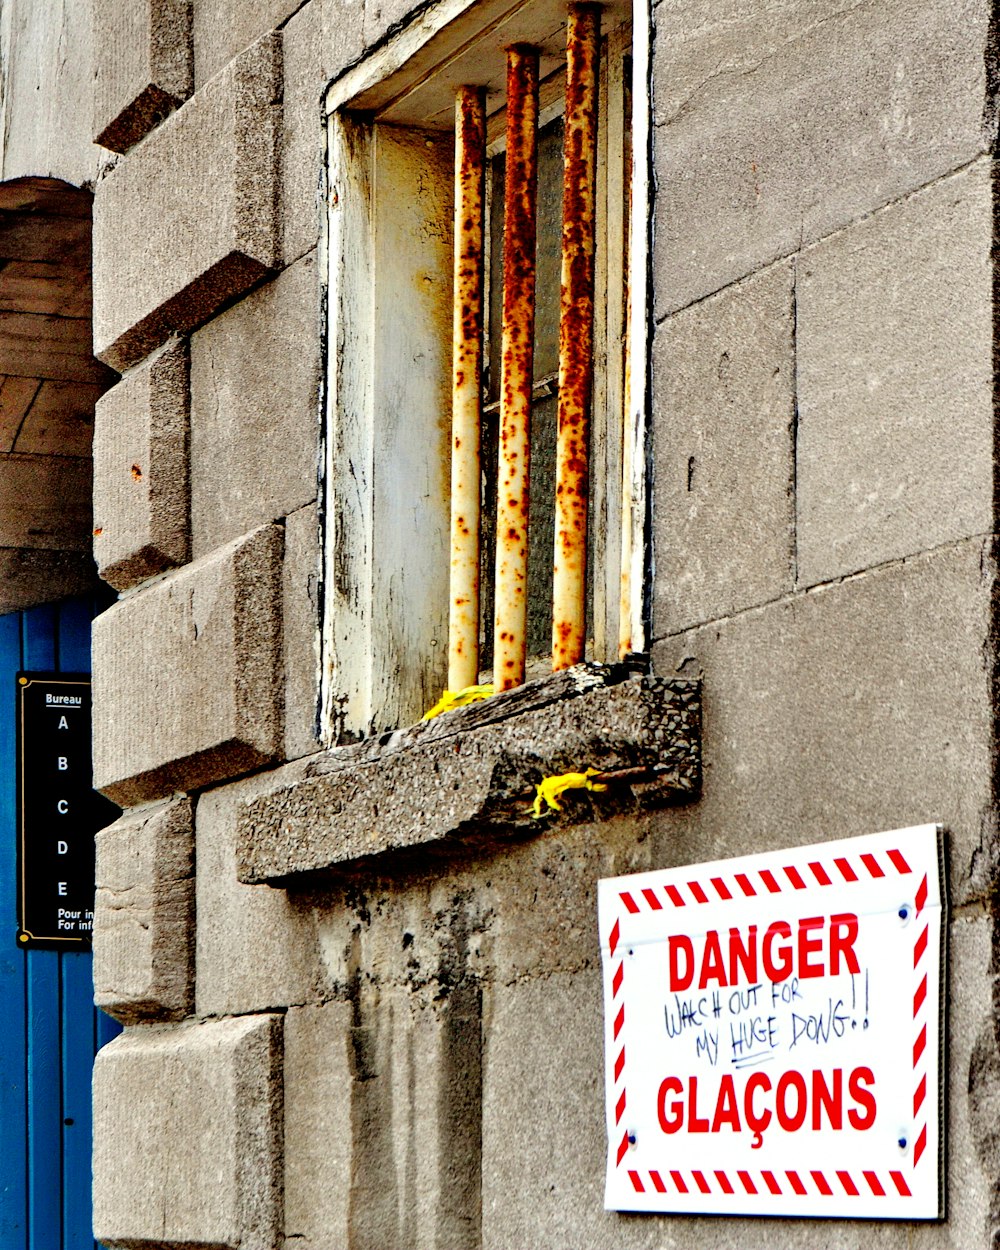 Danger signage on wall